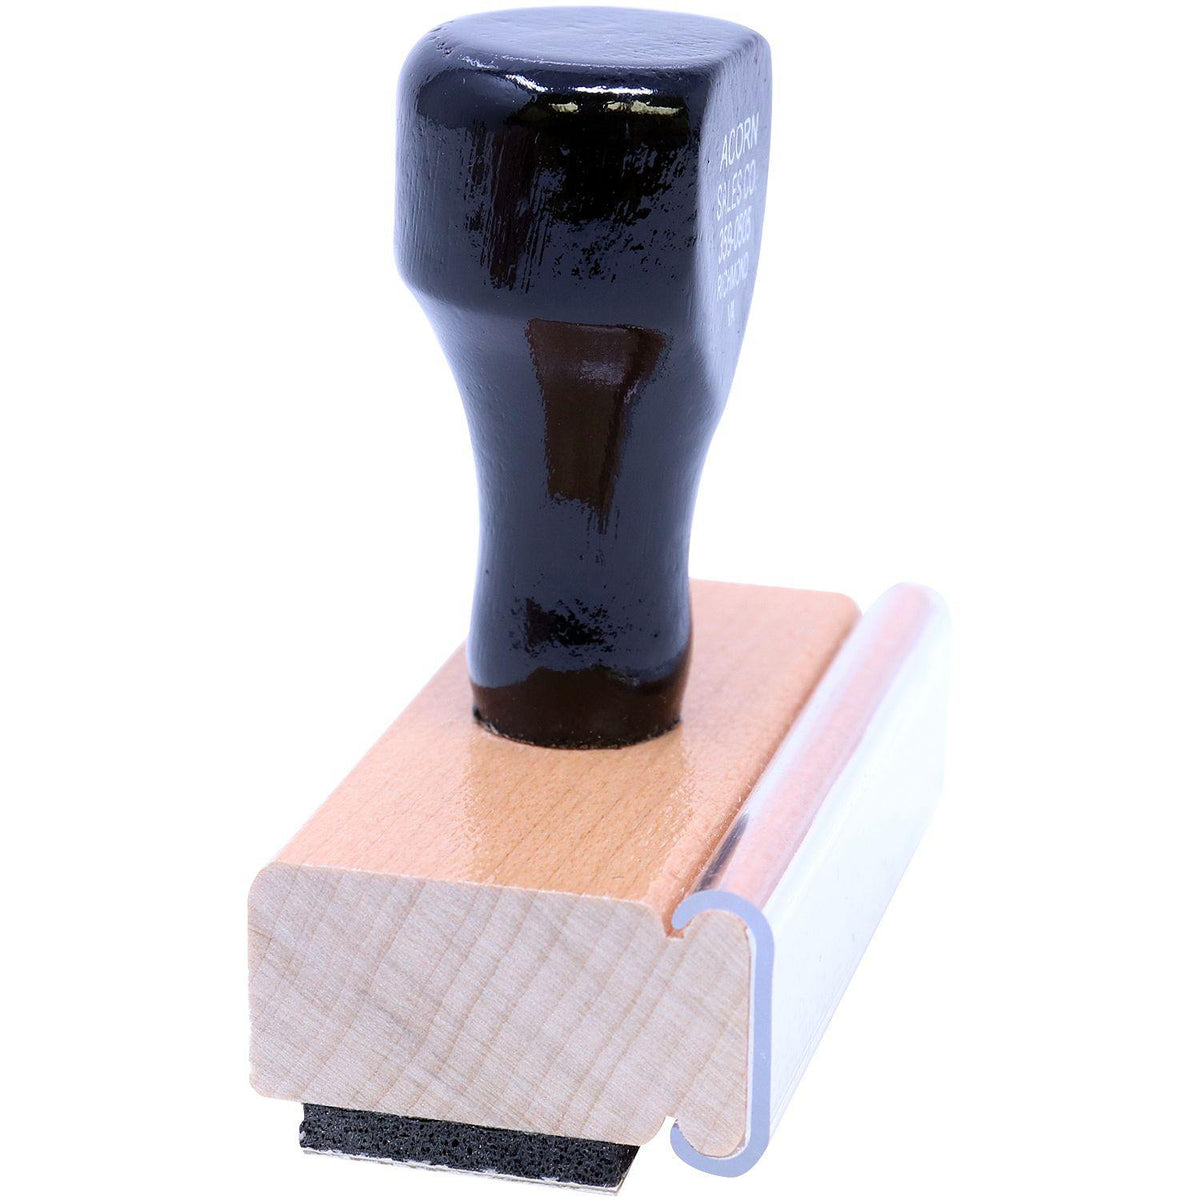 Side View of Courtesy Copy Original Filed Electronically Rubber Stamp at an Angle